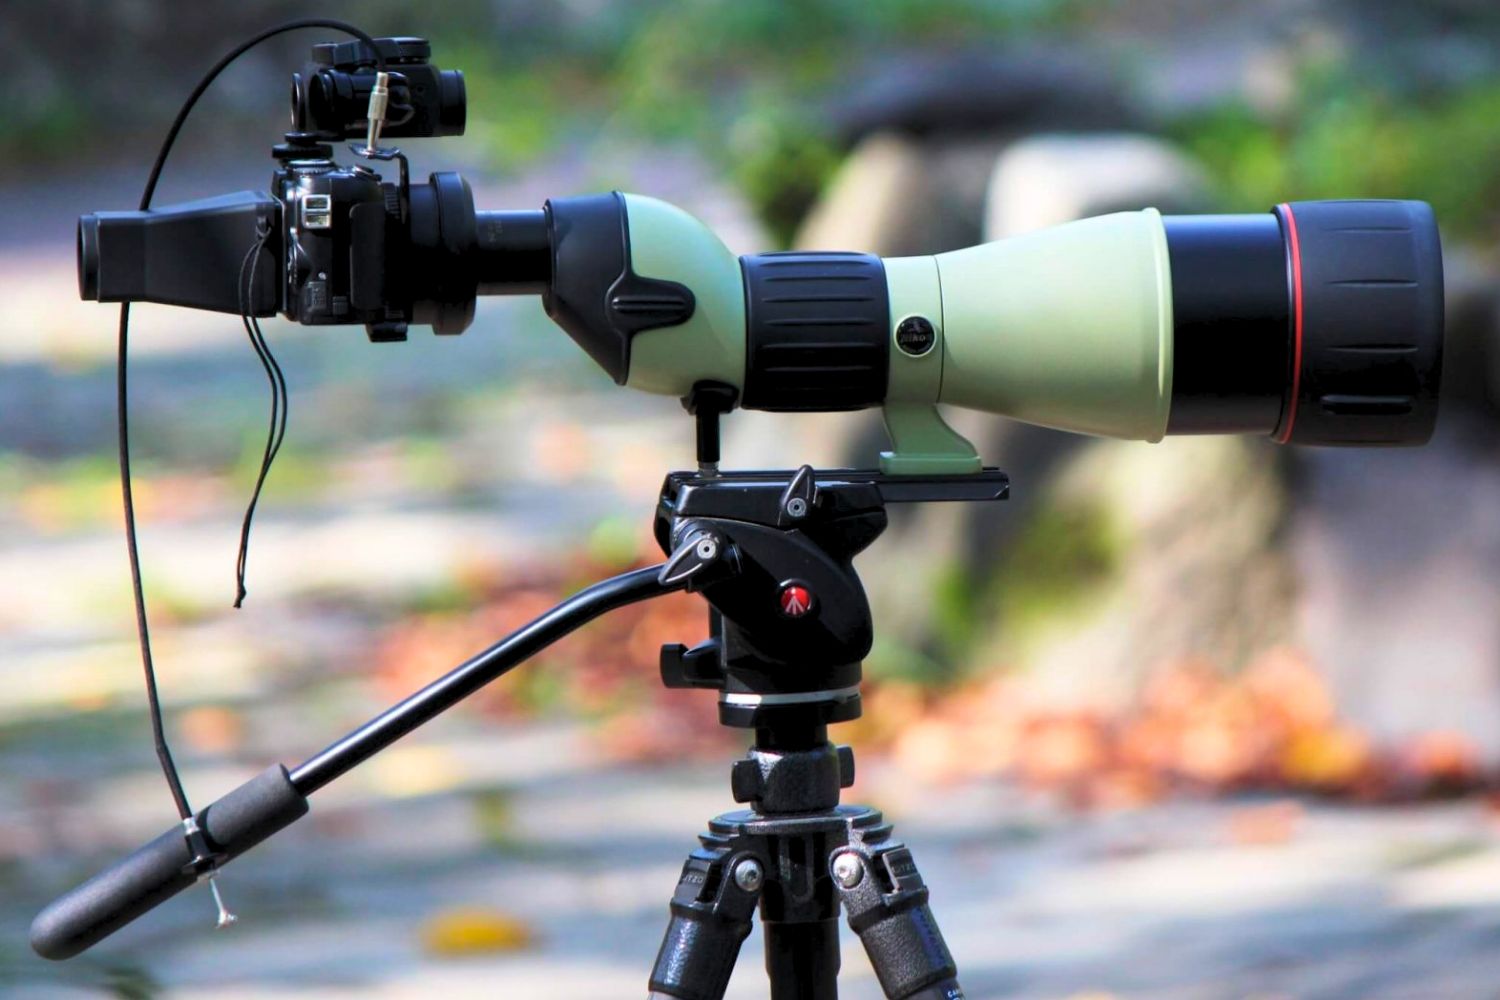 What is digiscoping?